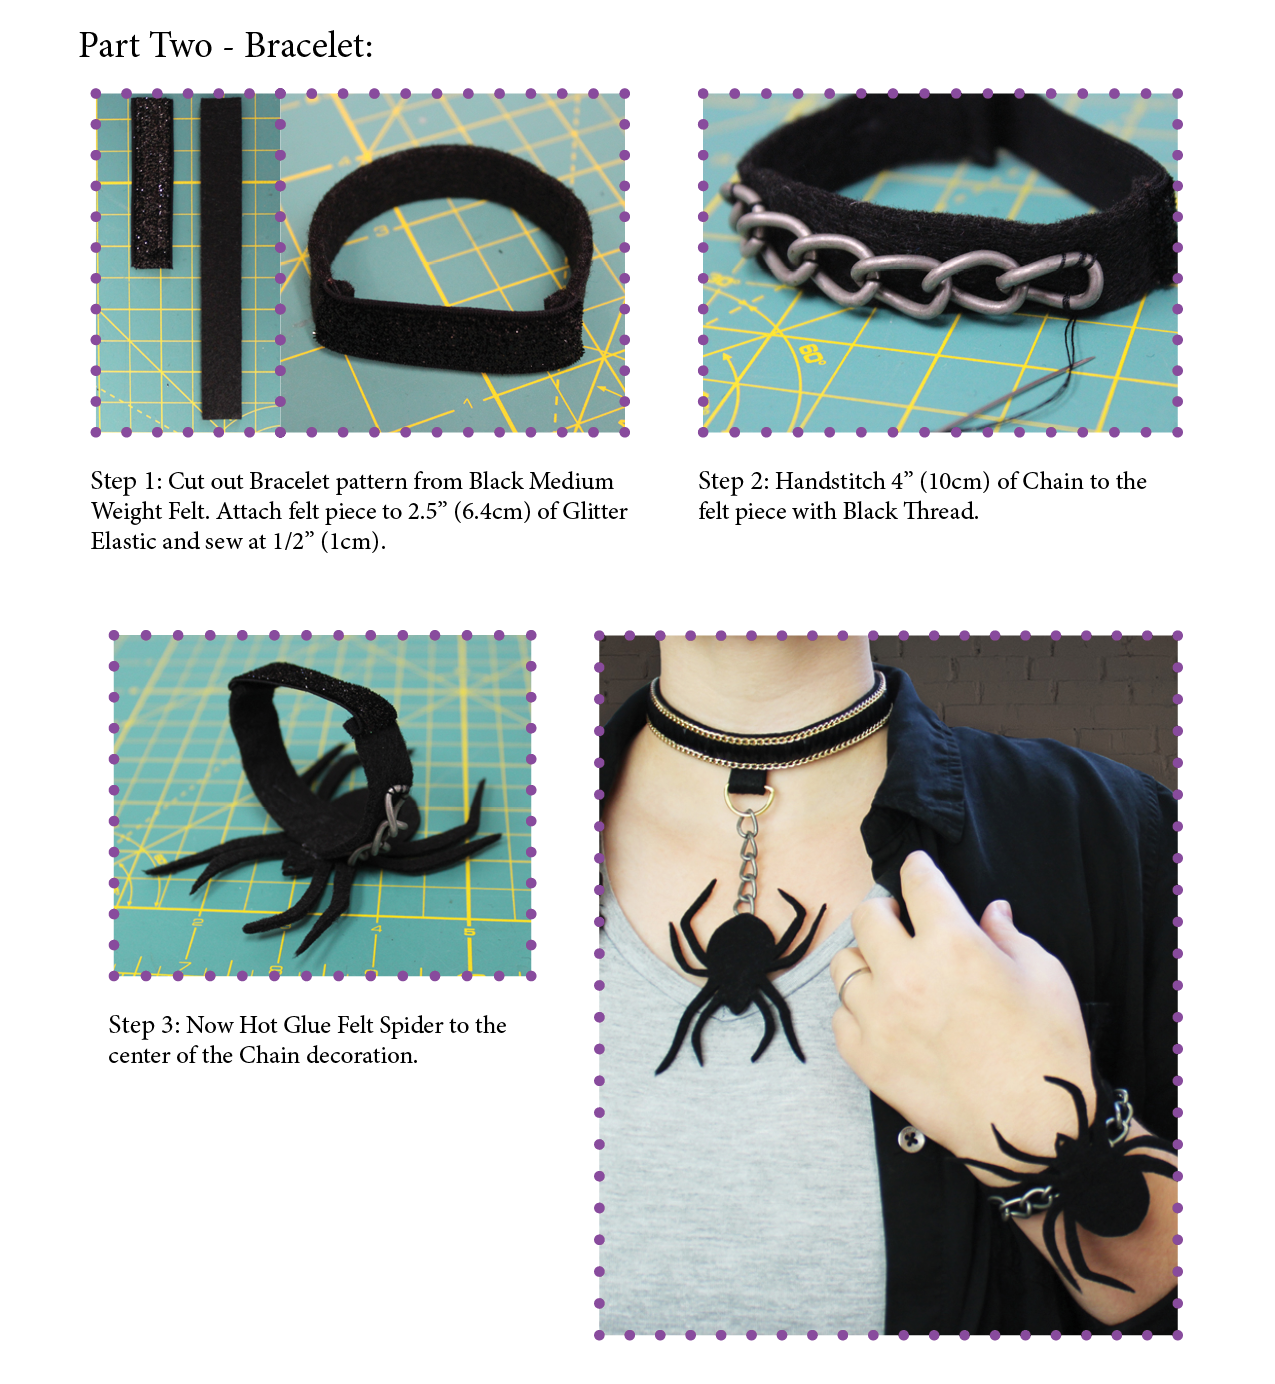 Second set of steps to creating your own Spider Fashion Accessories